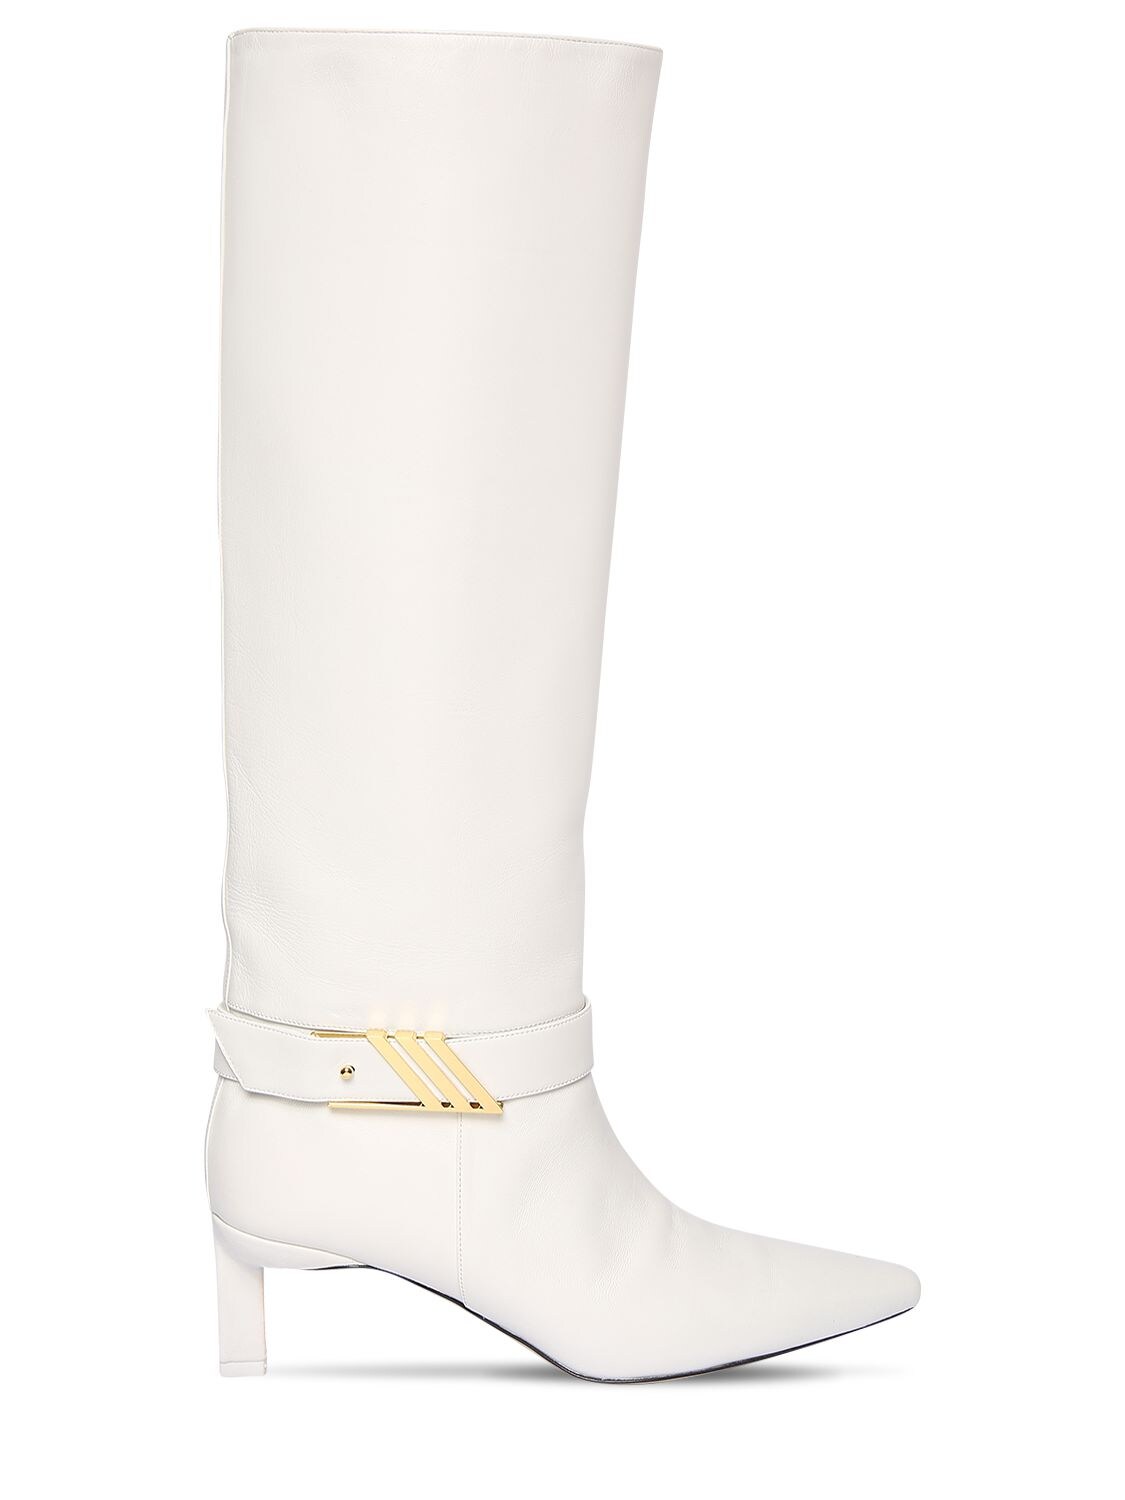 white tall boots